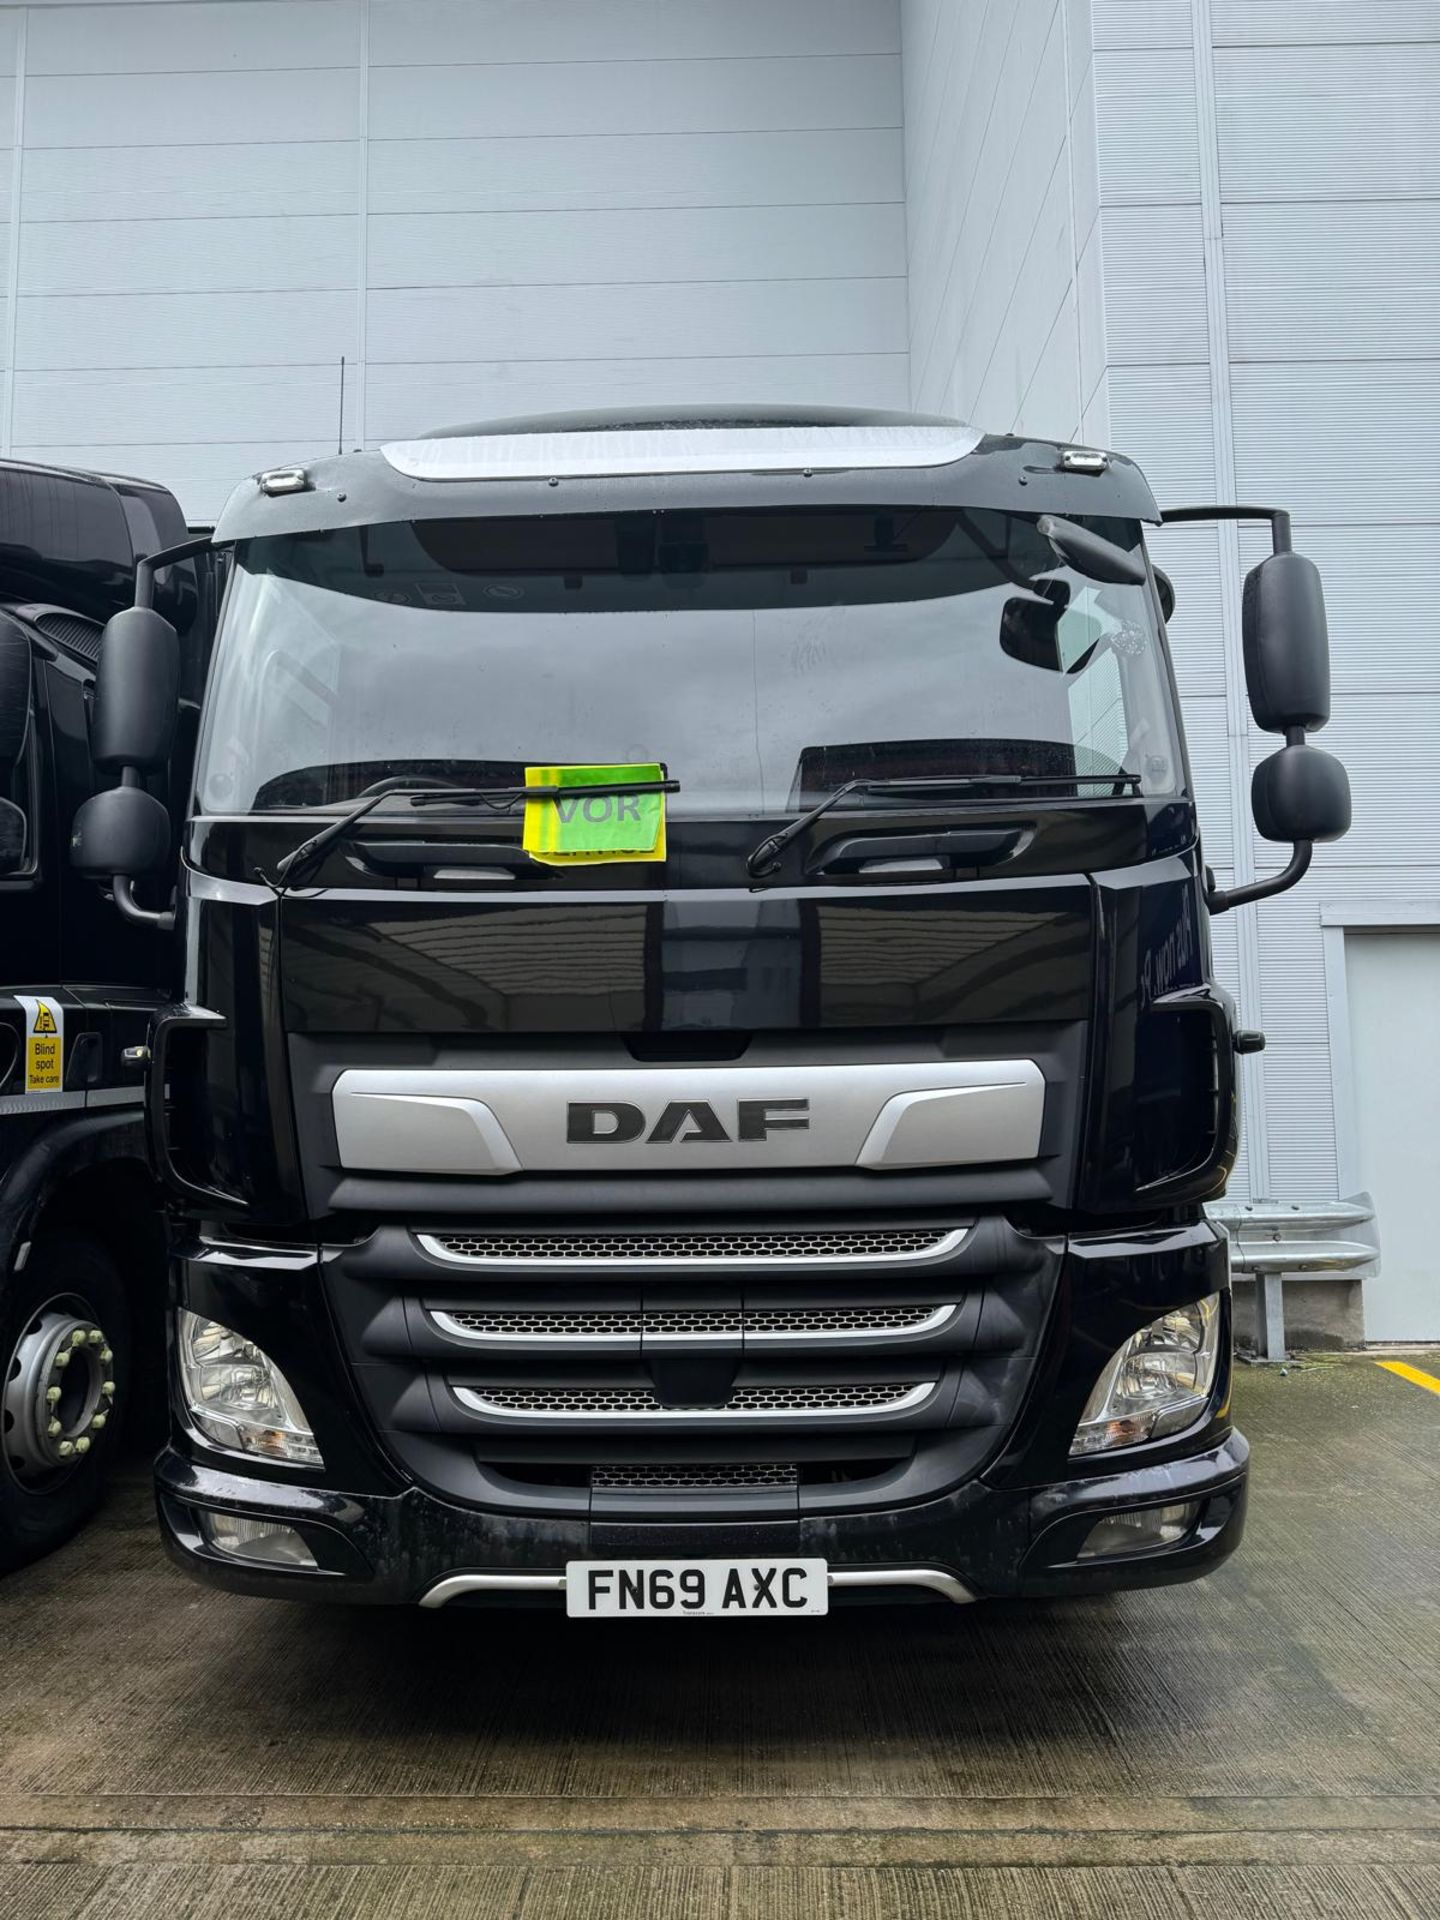 2019, DAF CF 260 FA - FN69 AXC (18 Ton Rigid Truck with Tail Lift) - Image 3 of 17